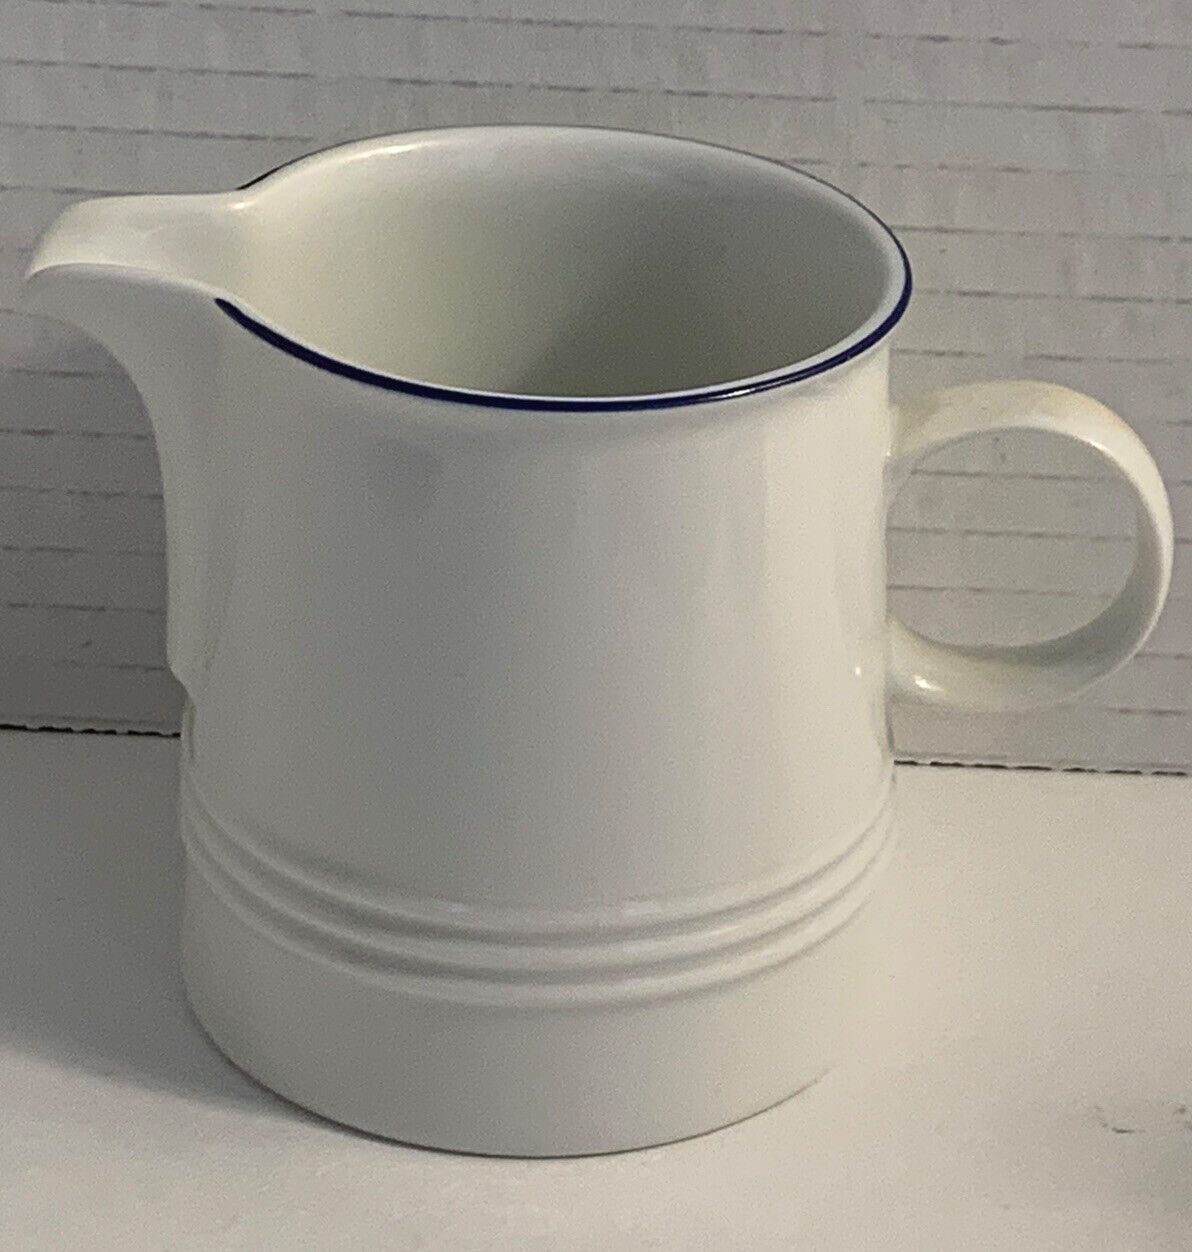 MELITTA Creamer Pitcher 3”  White w/ Blue MADE IN GERMANY  Minty